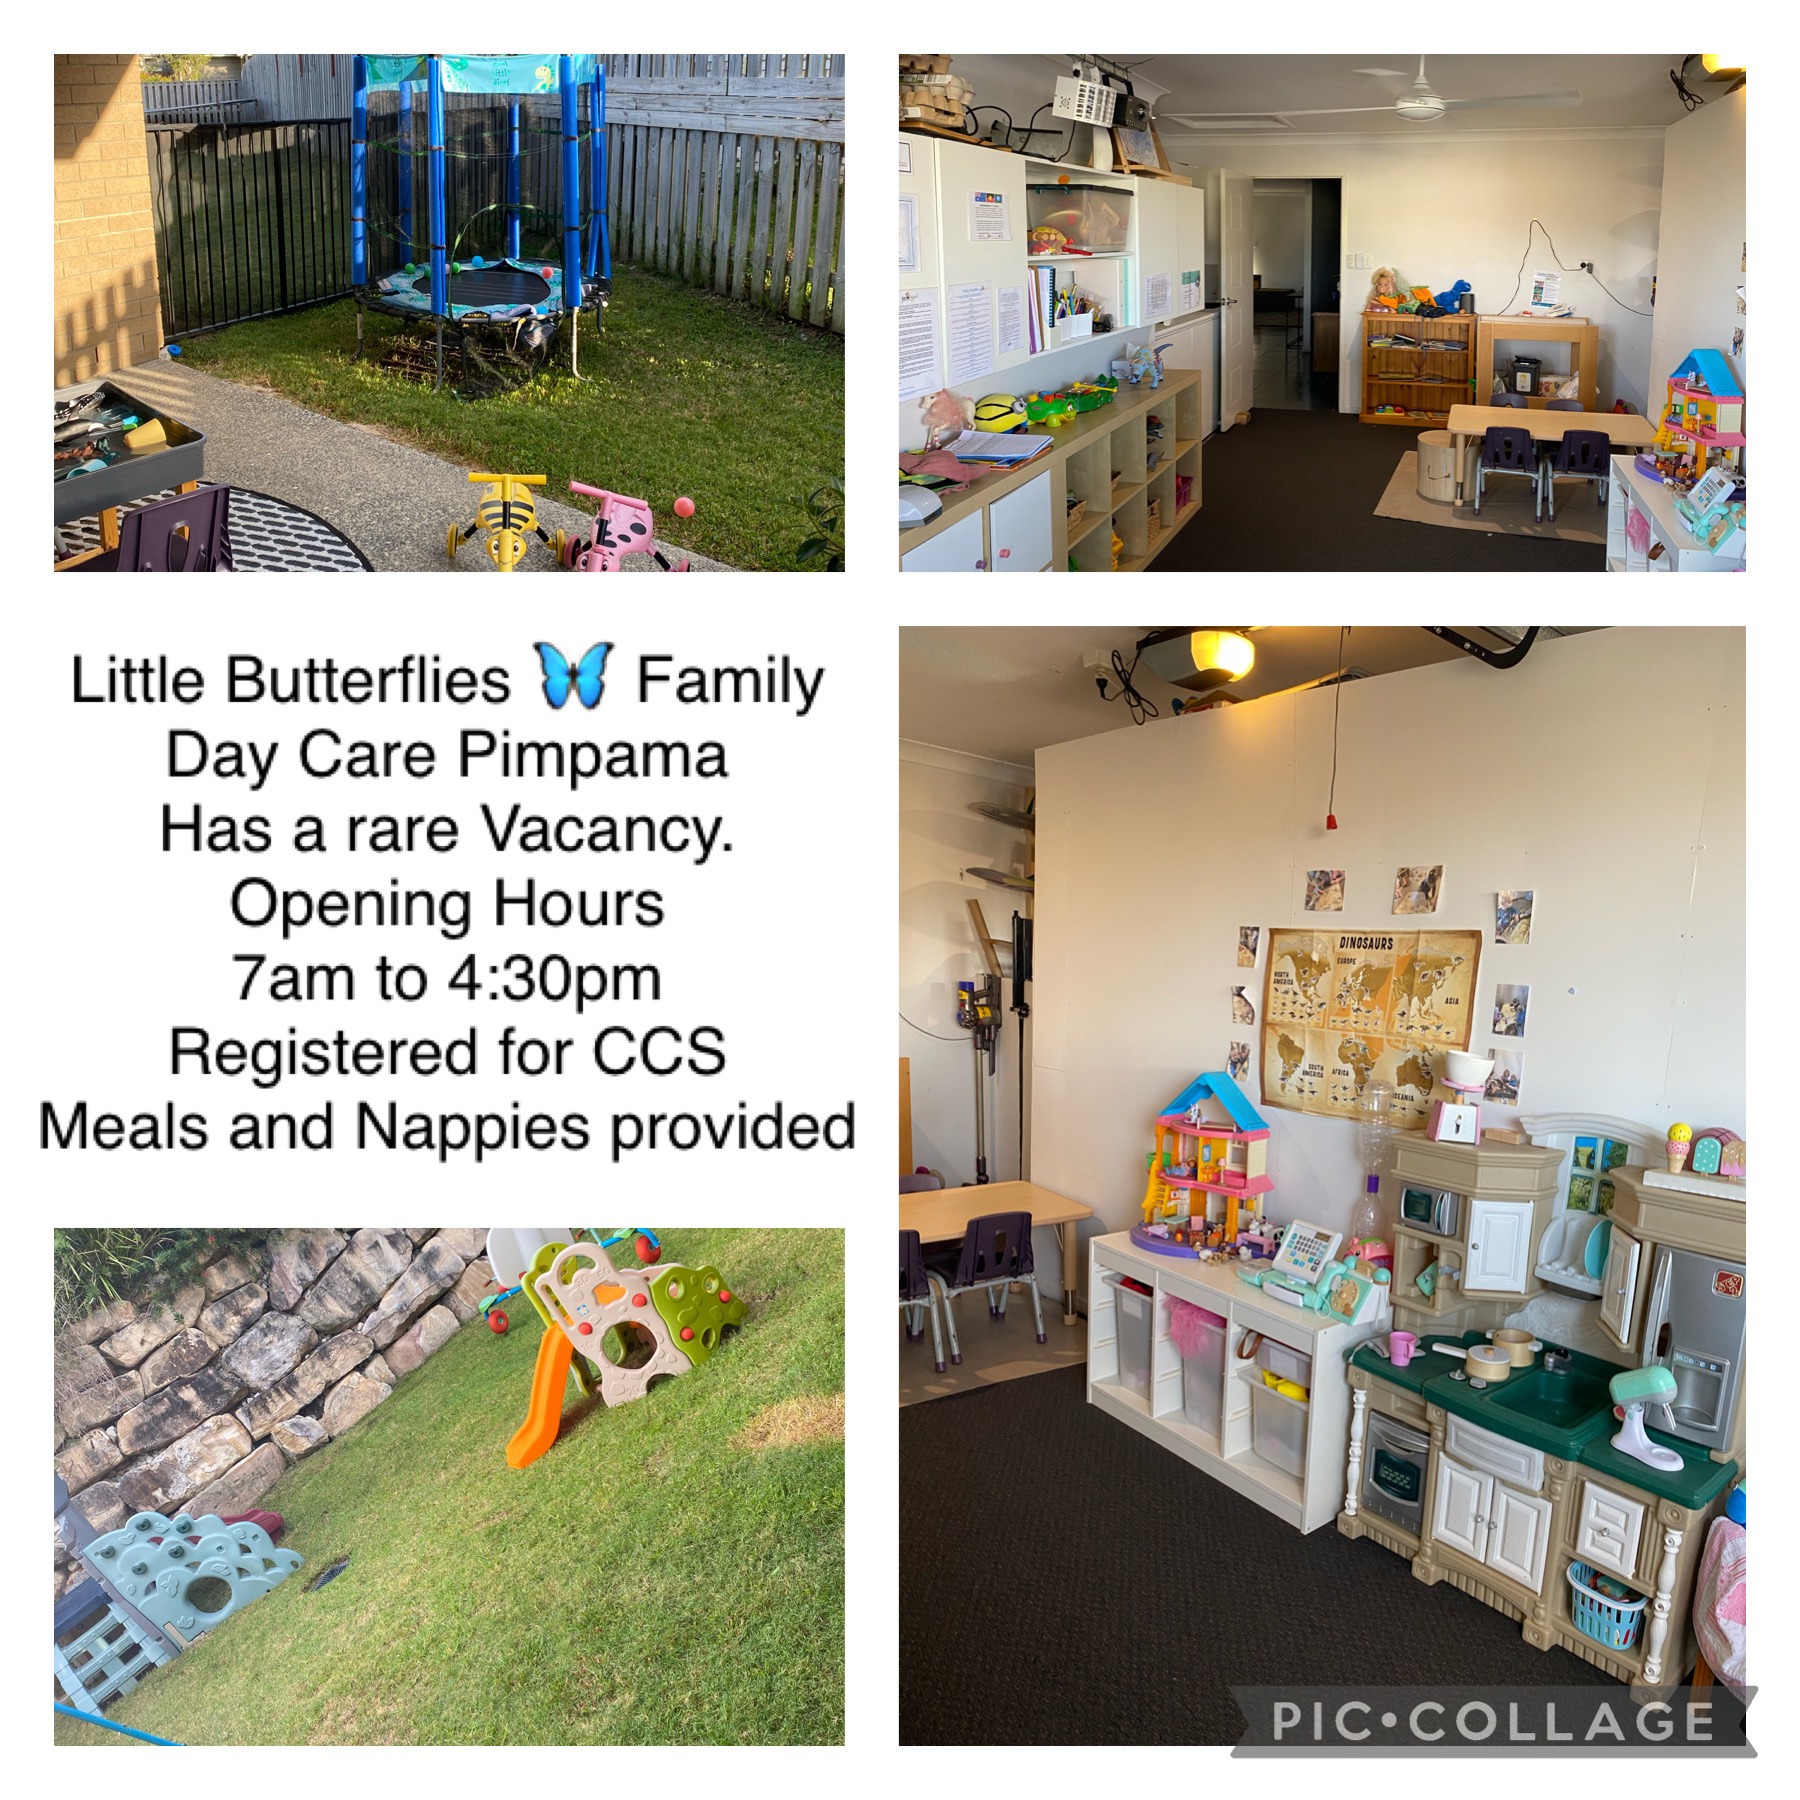 Little Butterflies Family Day Care Pimpama